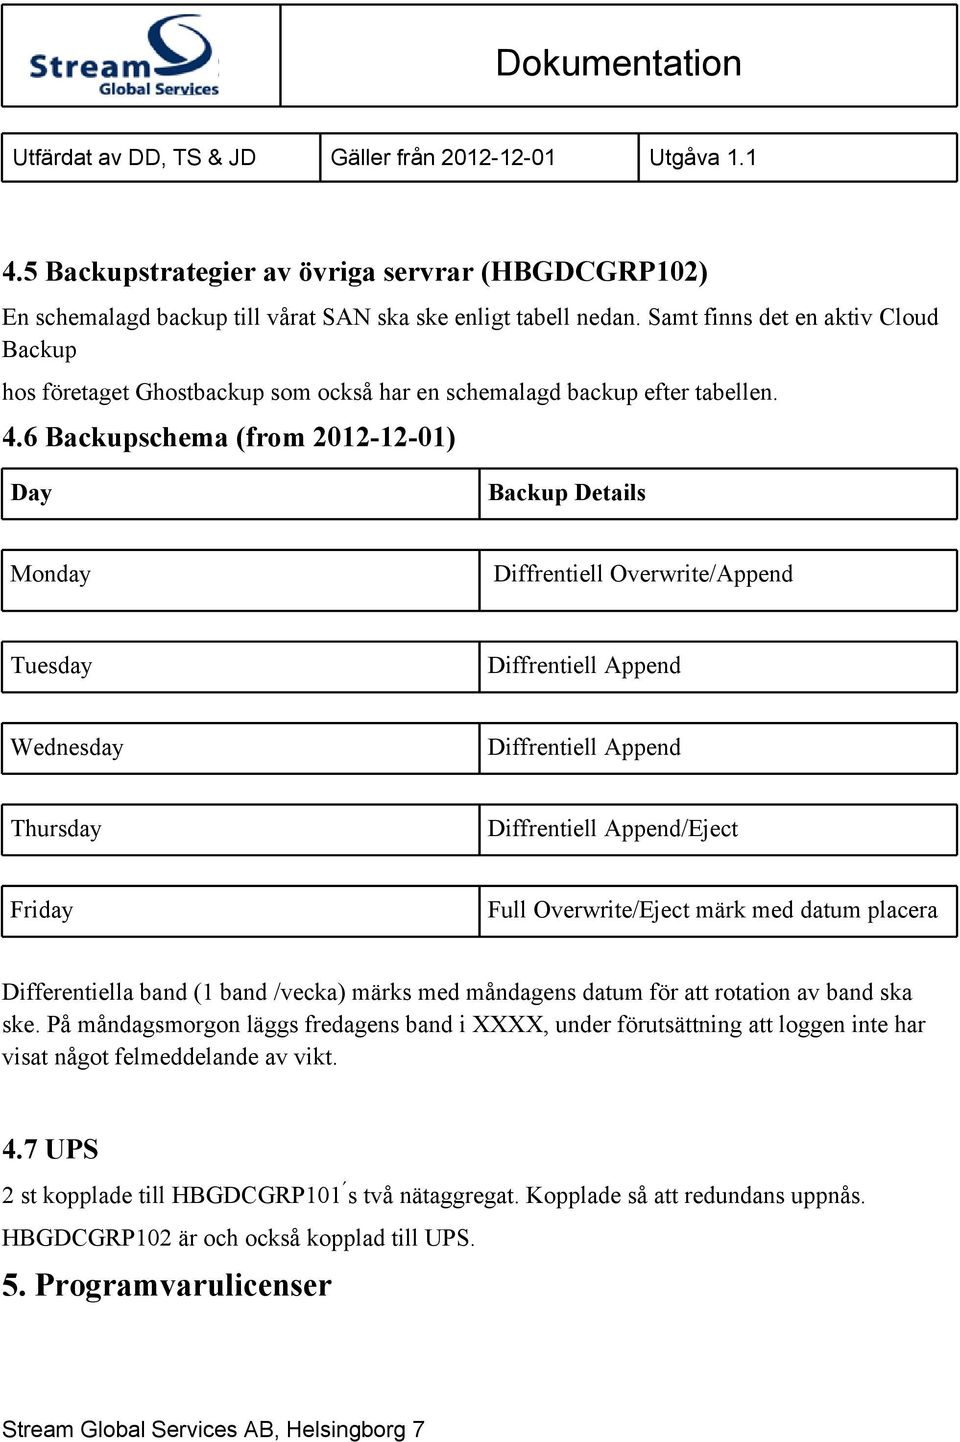 6 Backupschema (from 2012-12-01) Day Backup Details Monday Diffrentiell Overwrite/Append Tuesday Diffrentiell Append Wednesday Diffrentiell Append Thursday Diffrentiell Append/Eject Friday Full